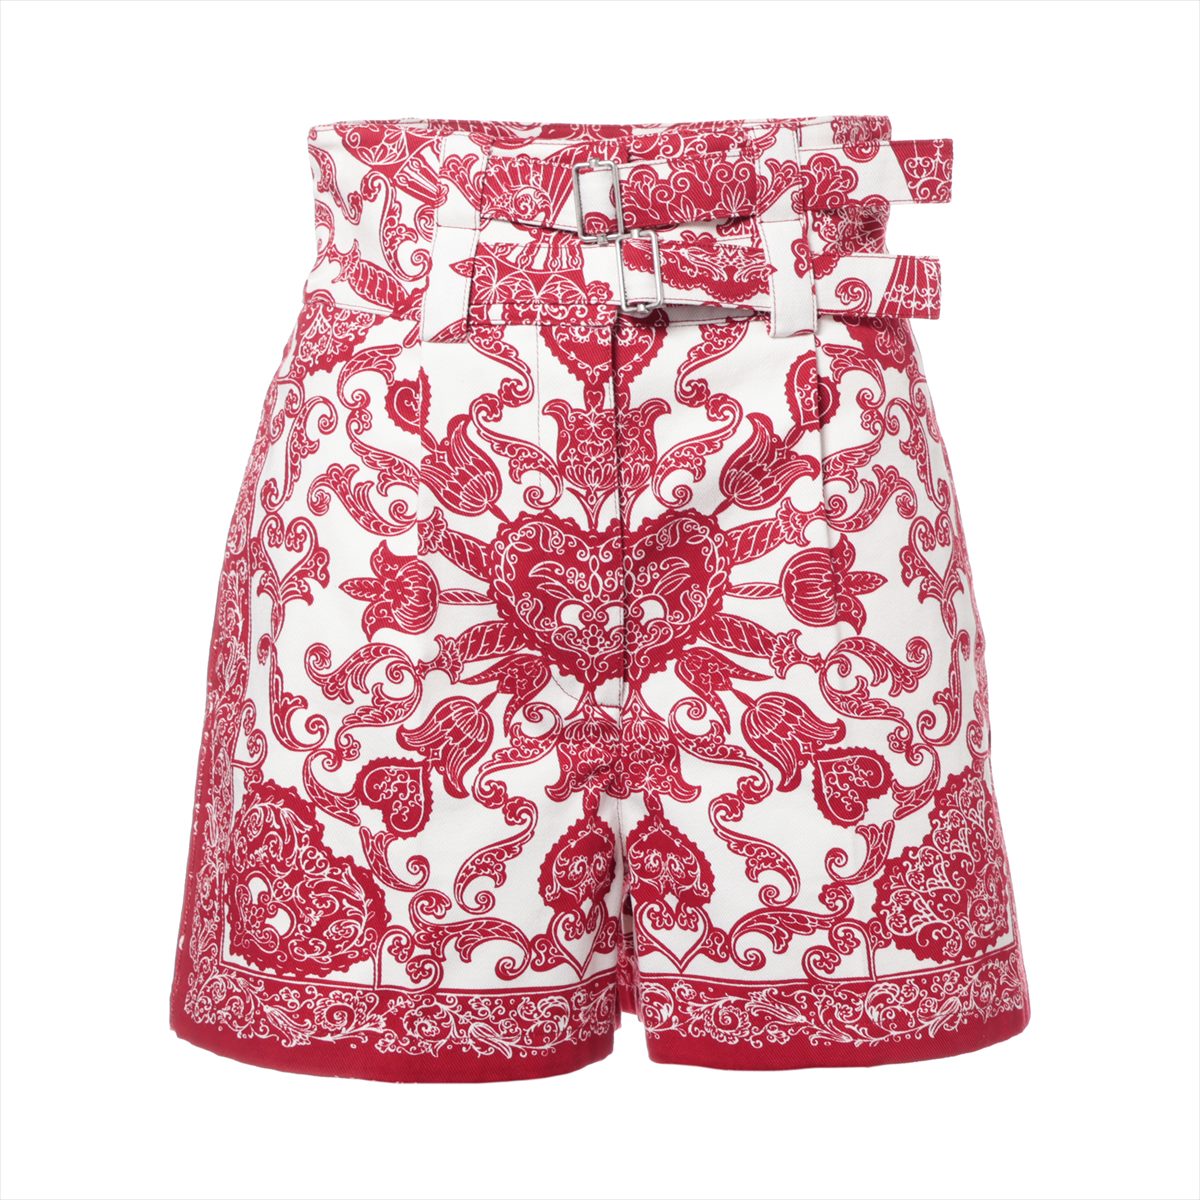 Christian Dior Cotton Short pants I40 Ladies' Red x white  317P52A3461